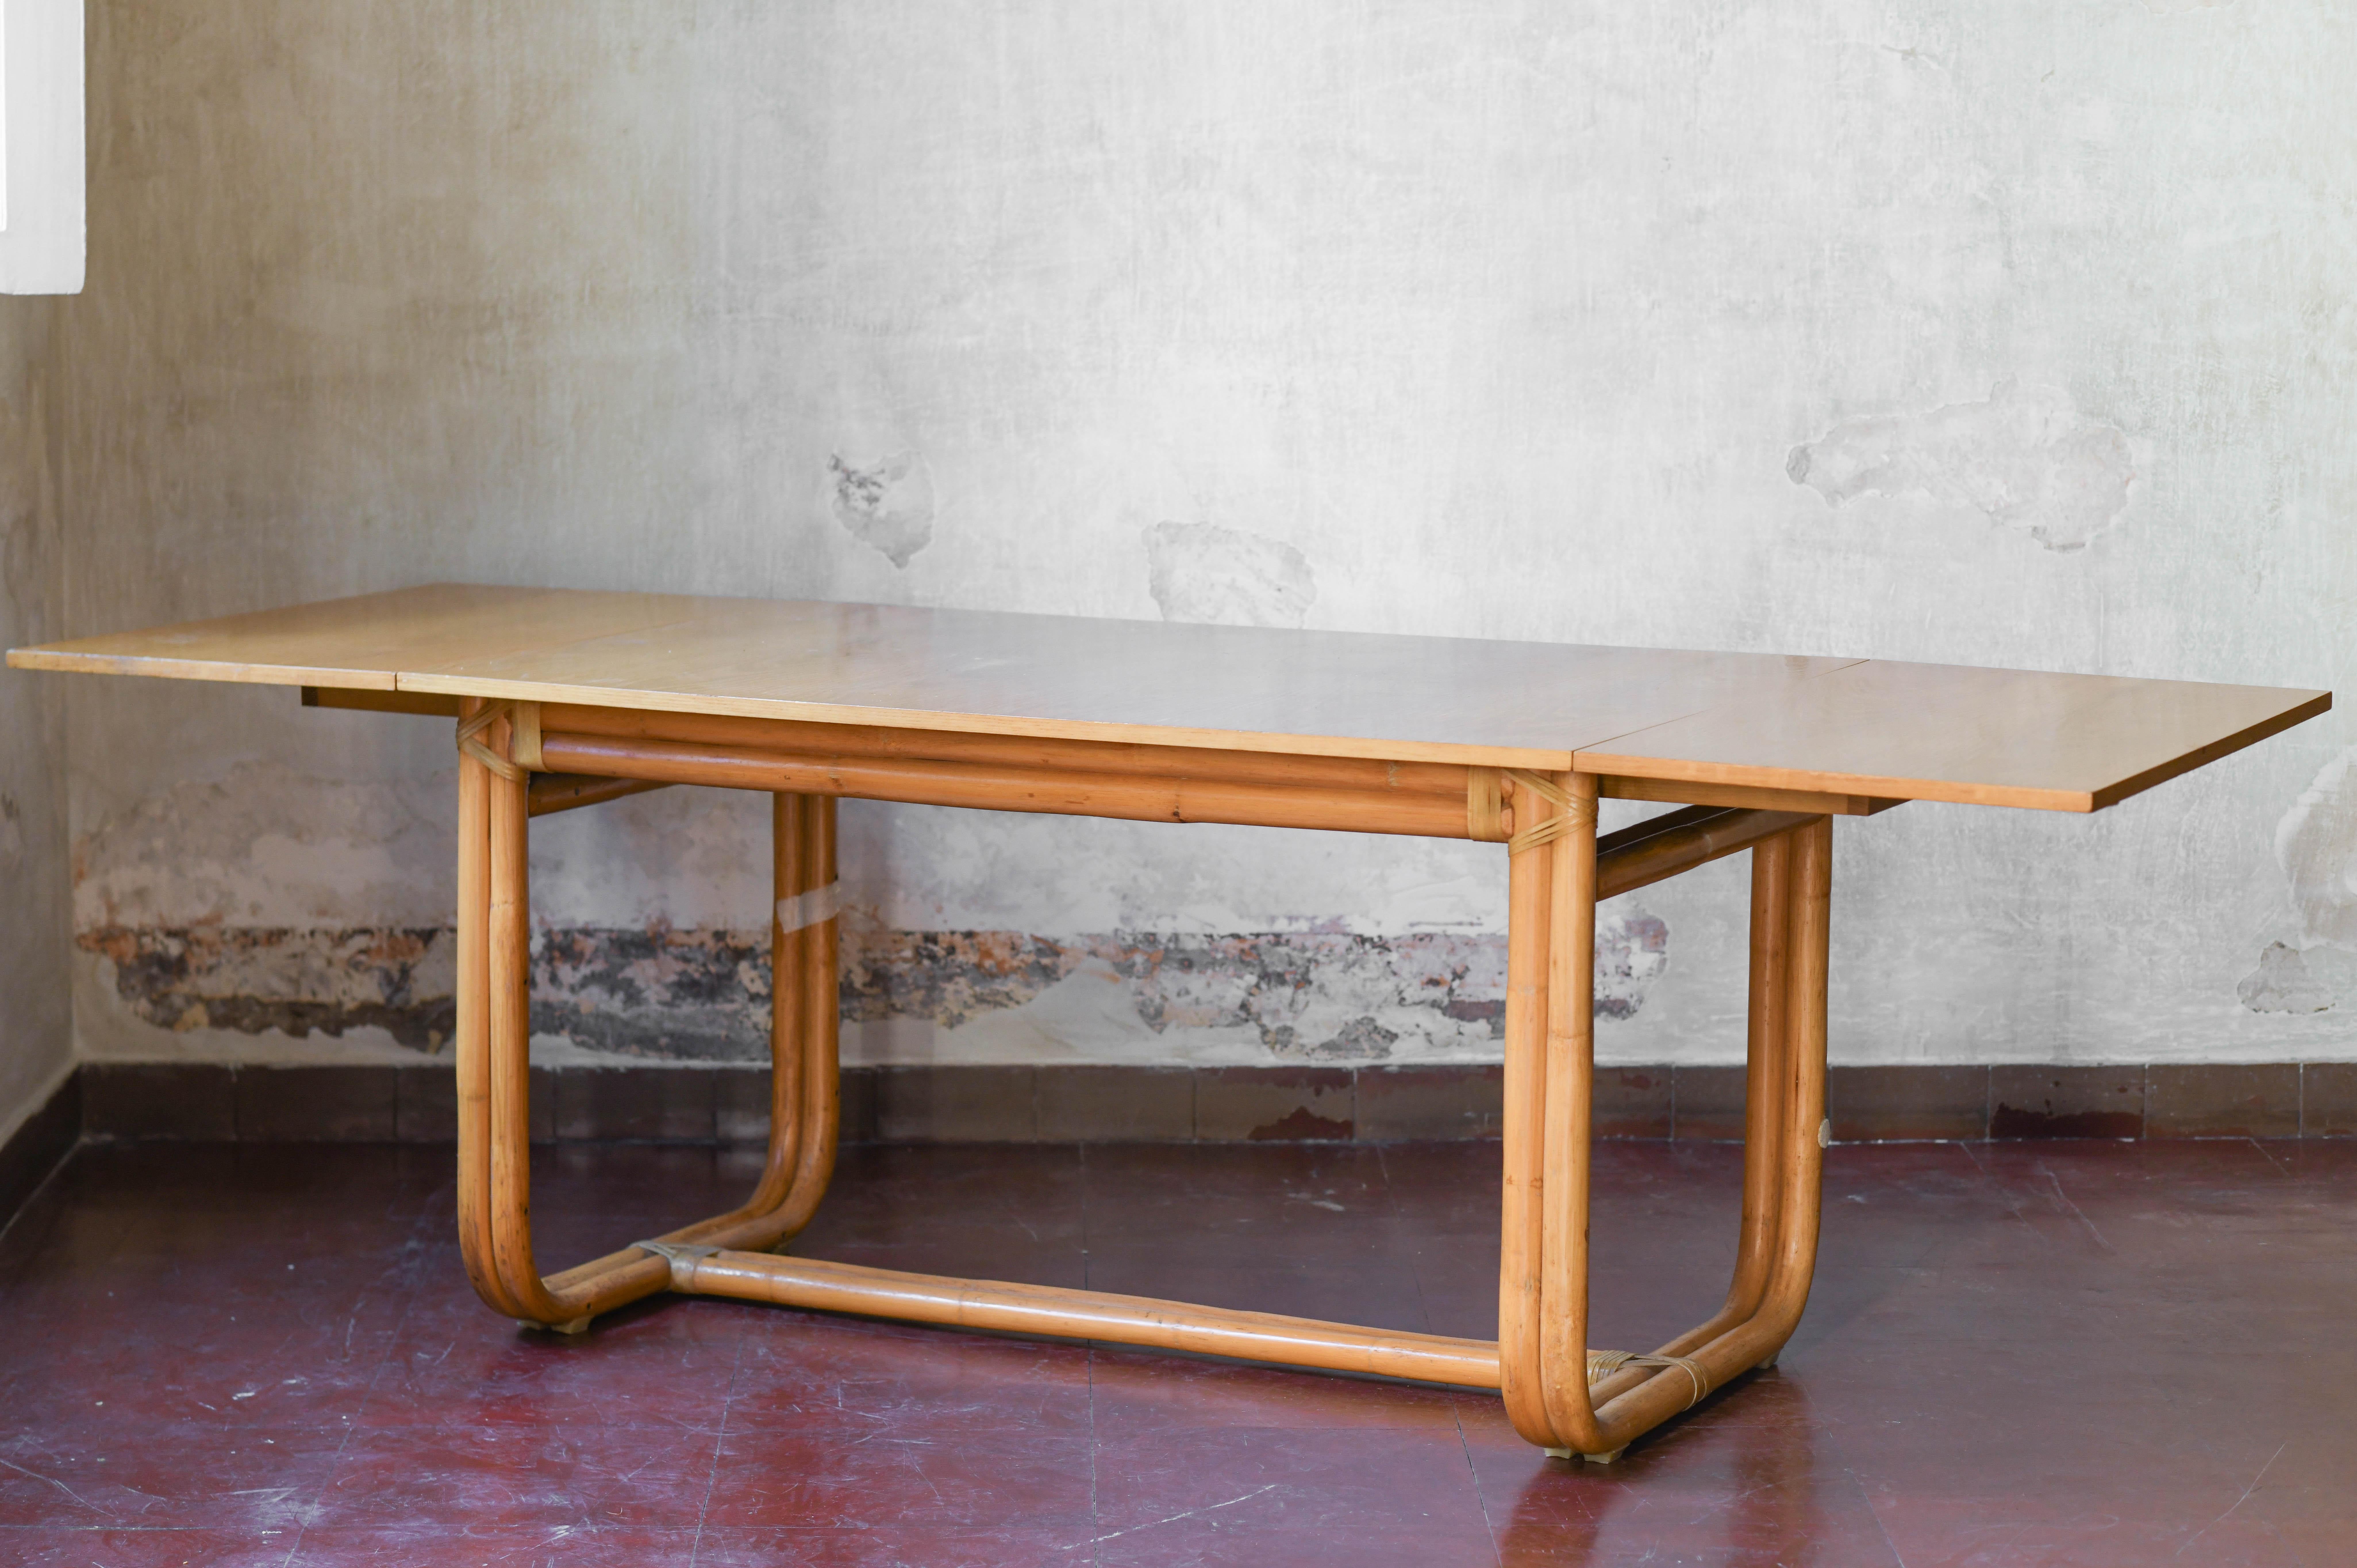 Late 20th Century Sabatin bamboo table with extendable wooden shelf and leather bindings